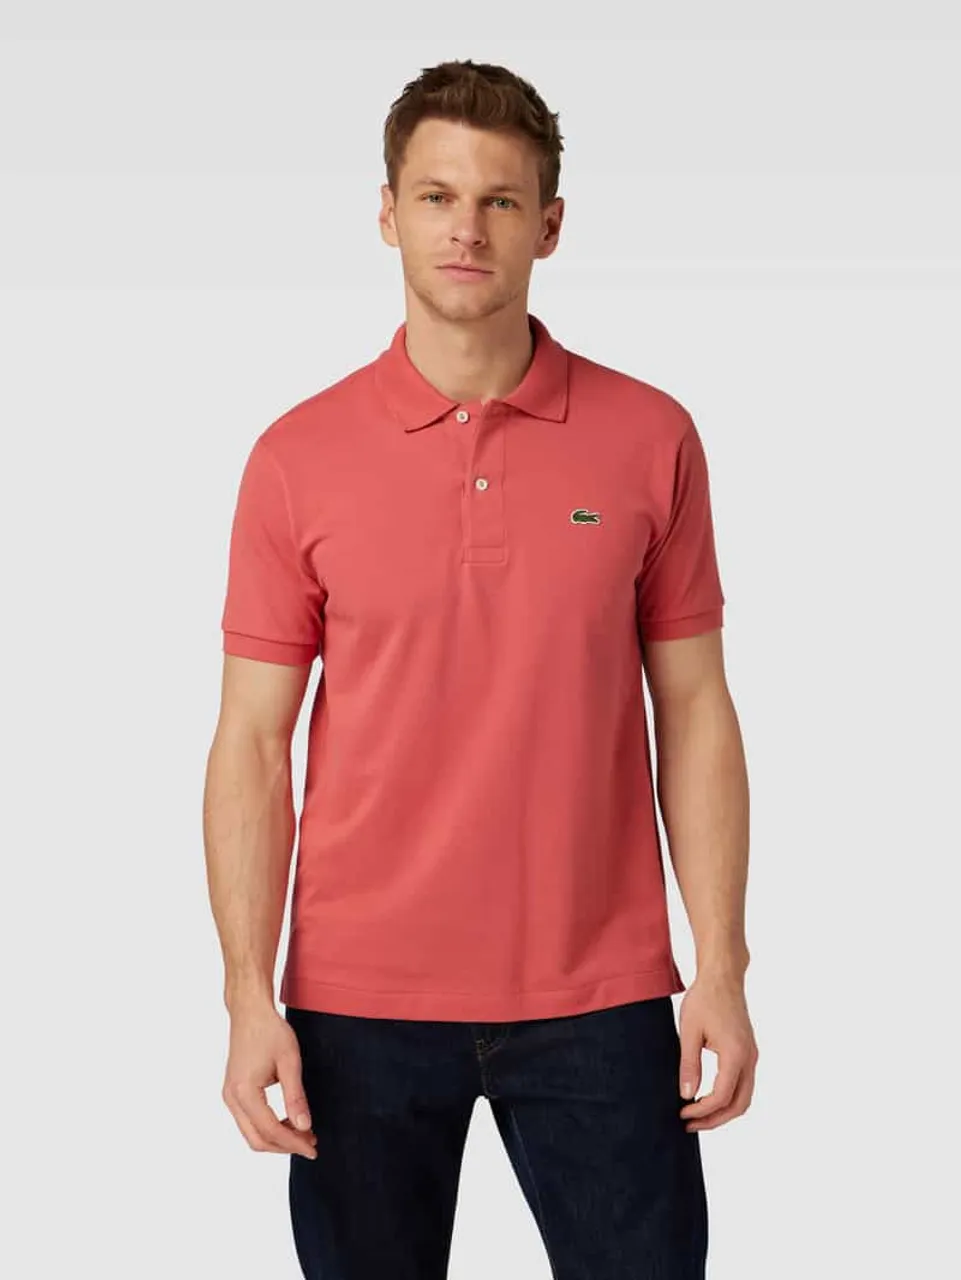 Lacoste Classic Fit Poloshirt mit Label-Detail in Dunkelrot